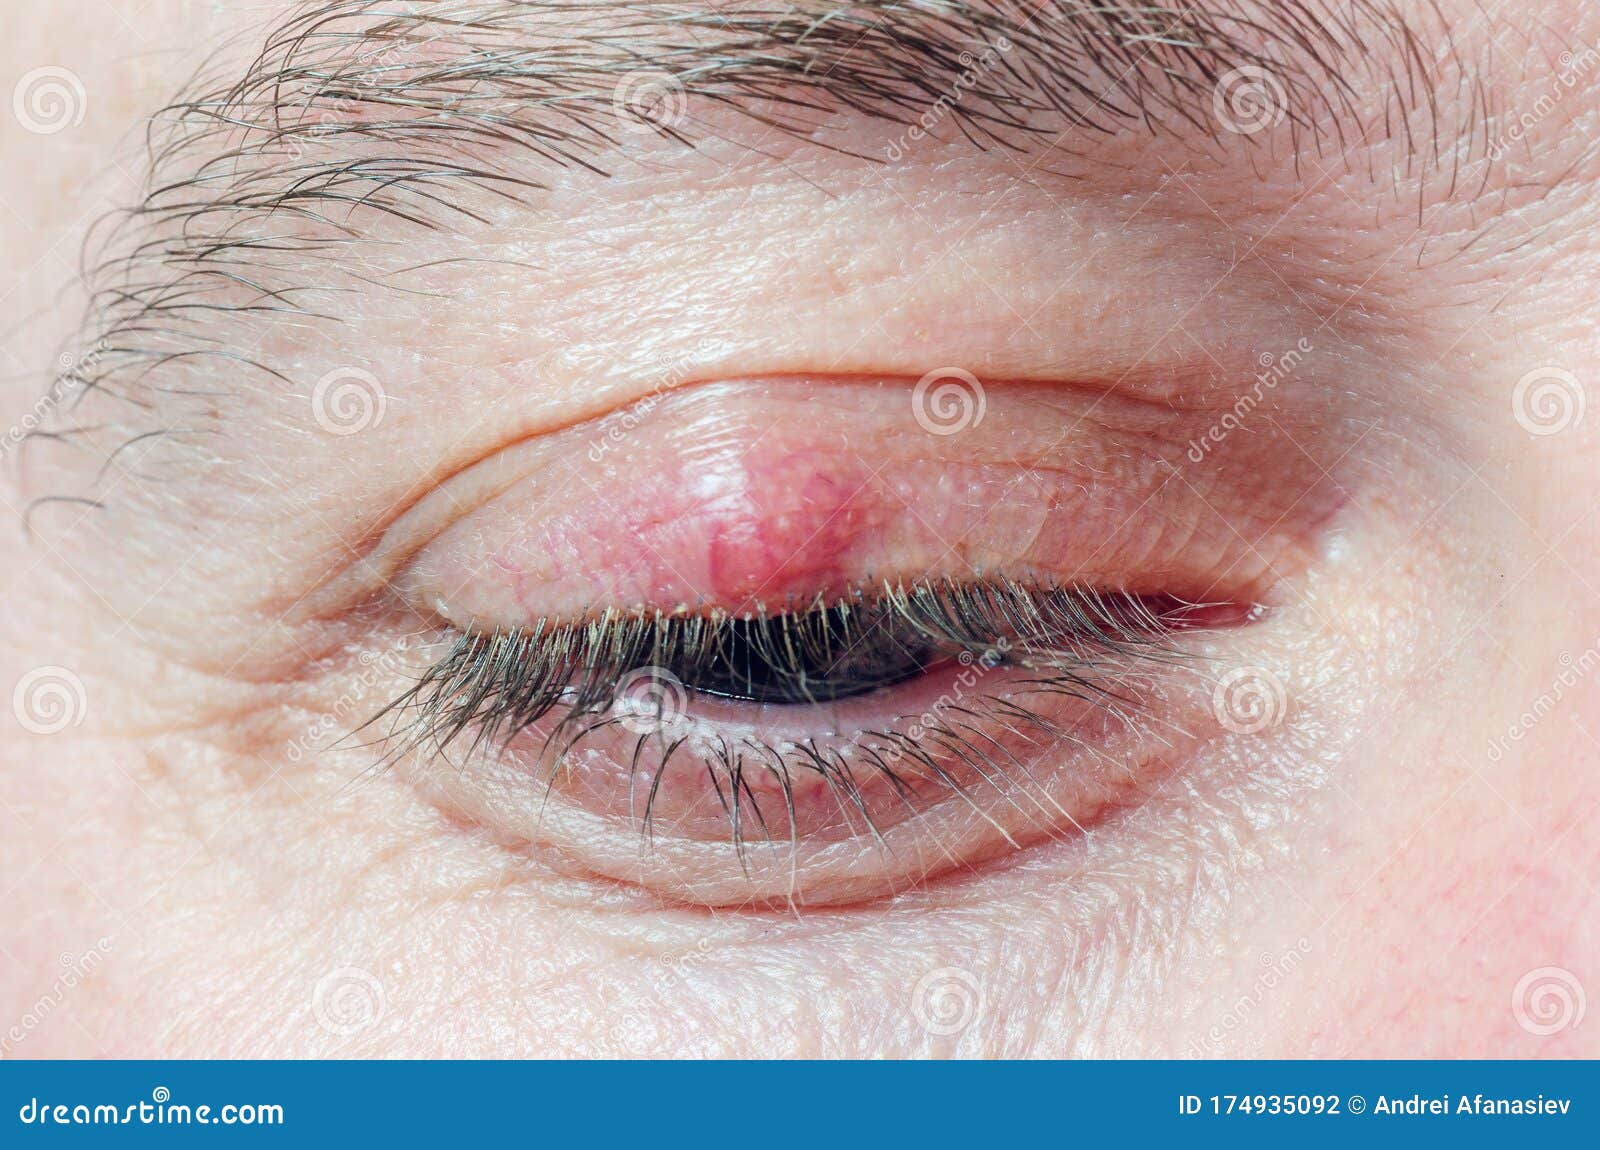 Chalazion On The Eyelid Of A Man Close Up Stock Photo Image Of Pain